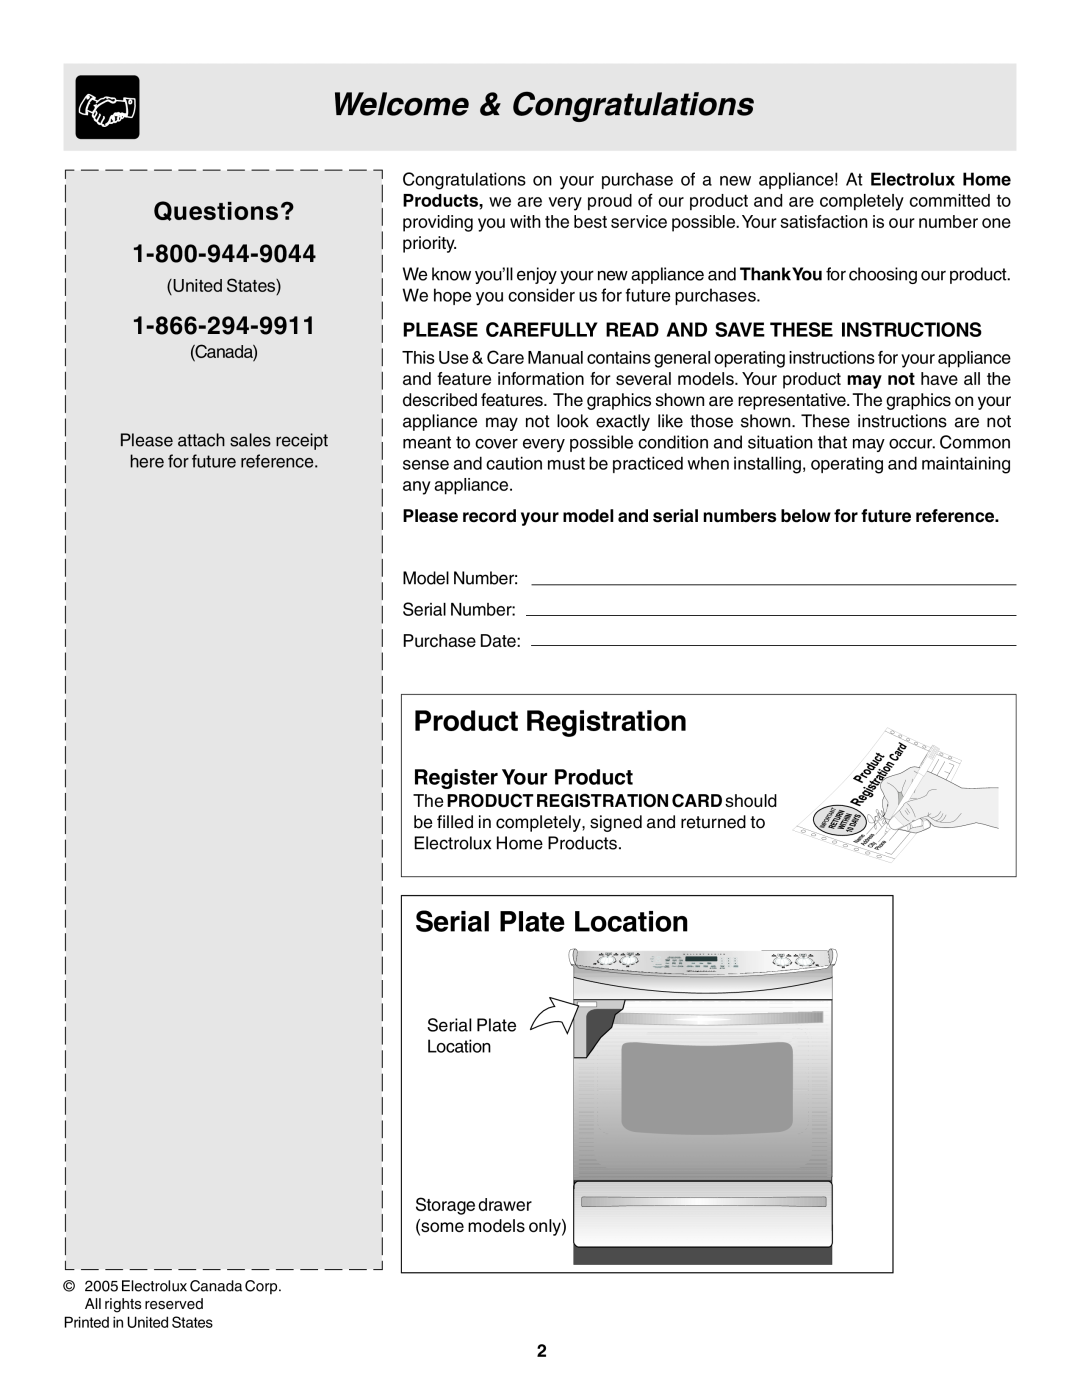 Frigidaire 318203860 Welcome & Congratulations, Product Registration, Serial Plate Location, Questions? 1-800-944-9044 